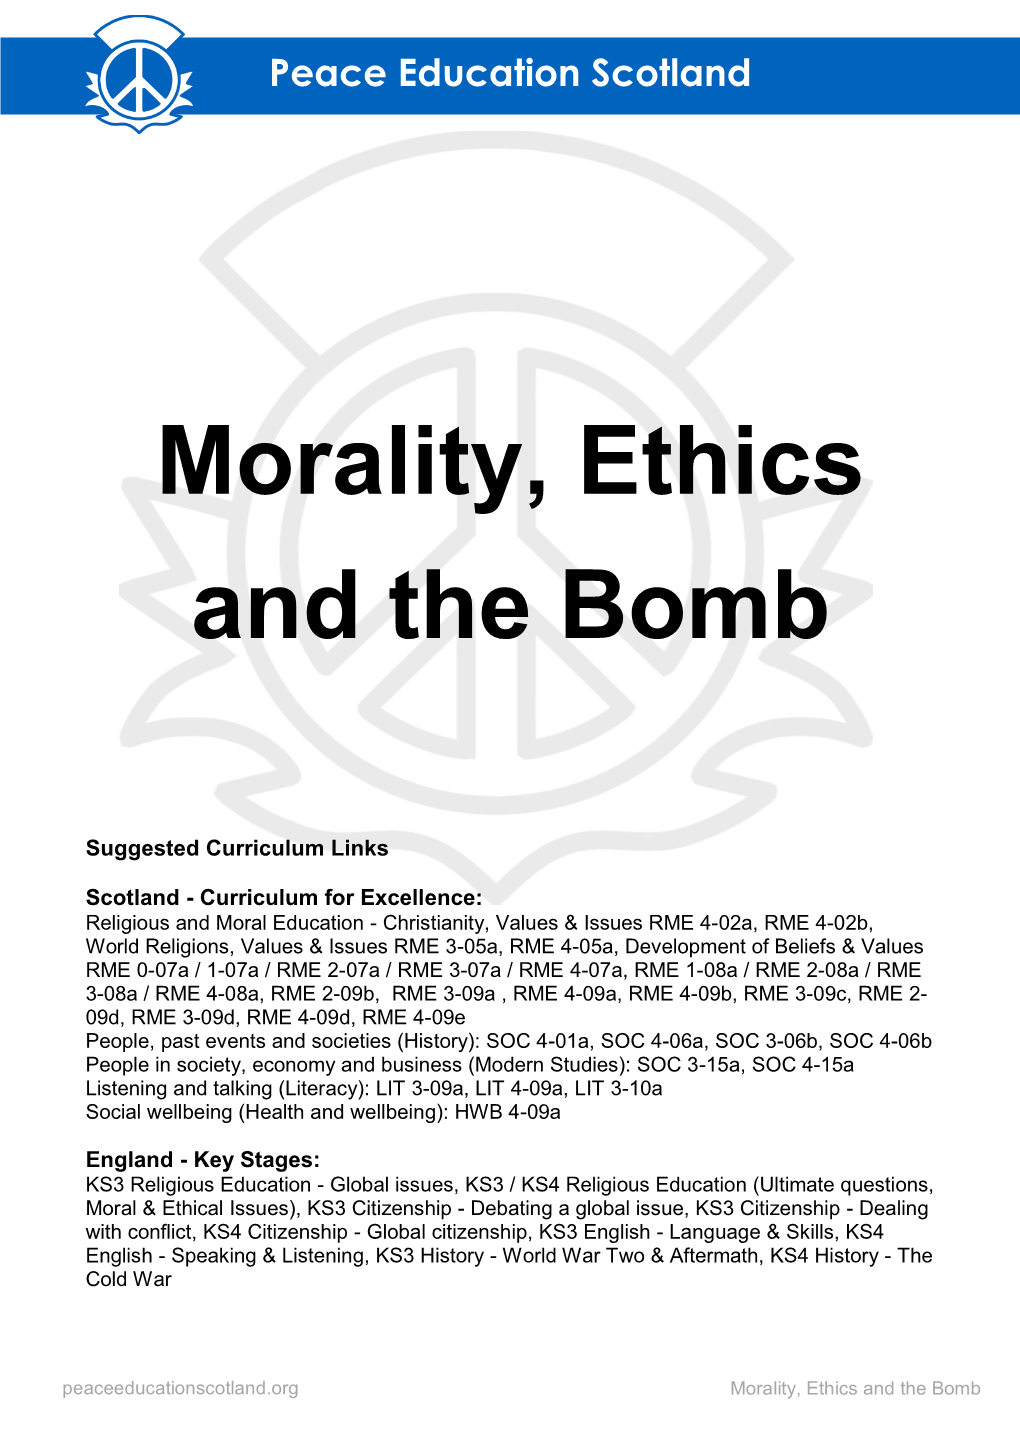 Morality, Ethics and the Bomb